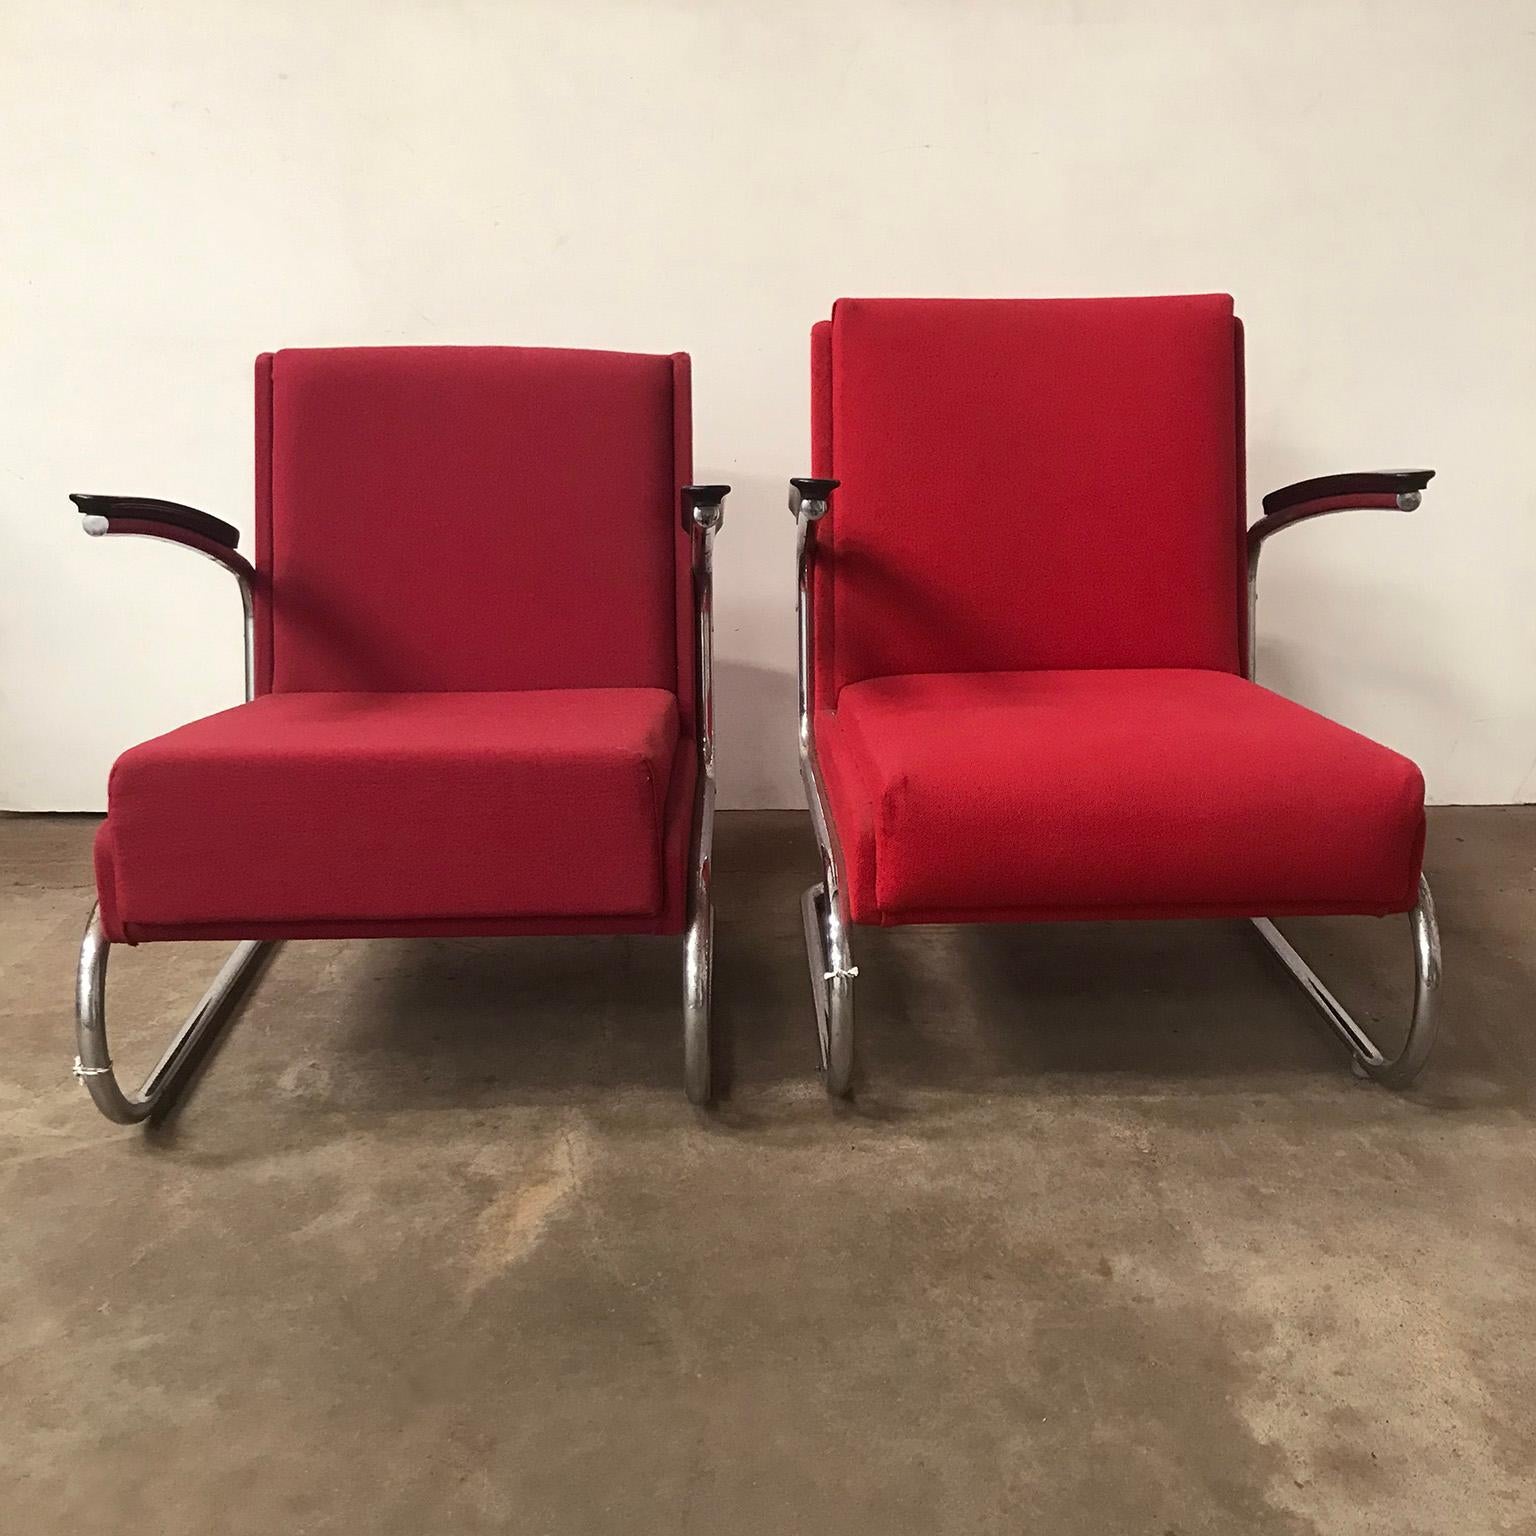 Dutch Tubular Easy Chair in Burgundy Red and Black Armrests, circa 1930 13